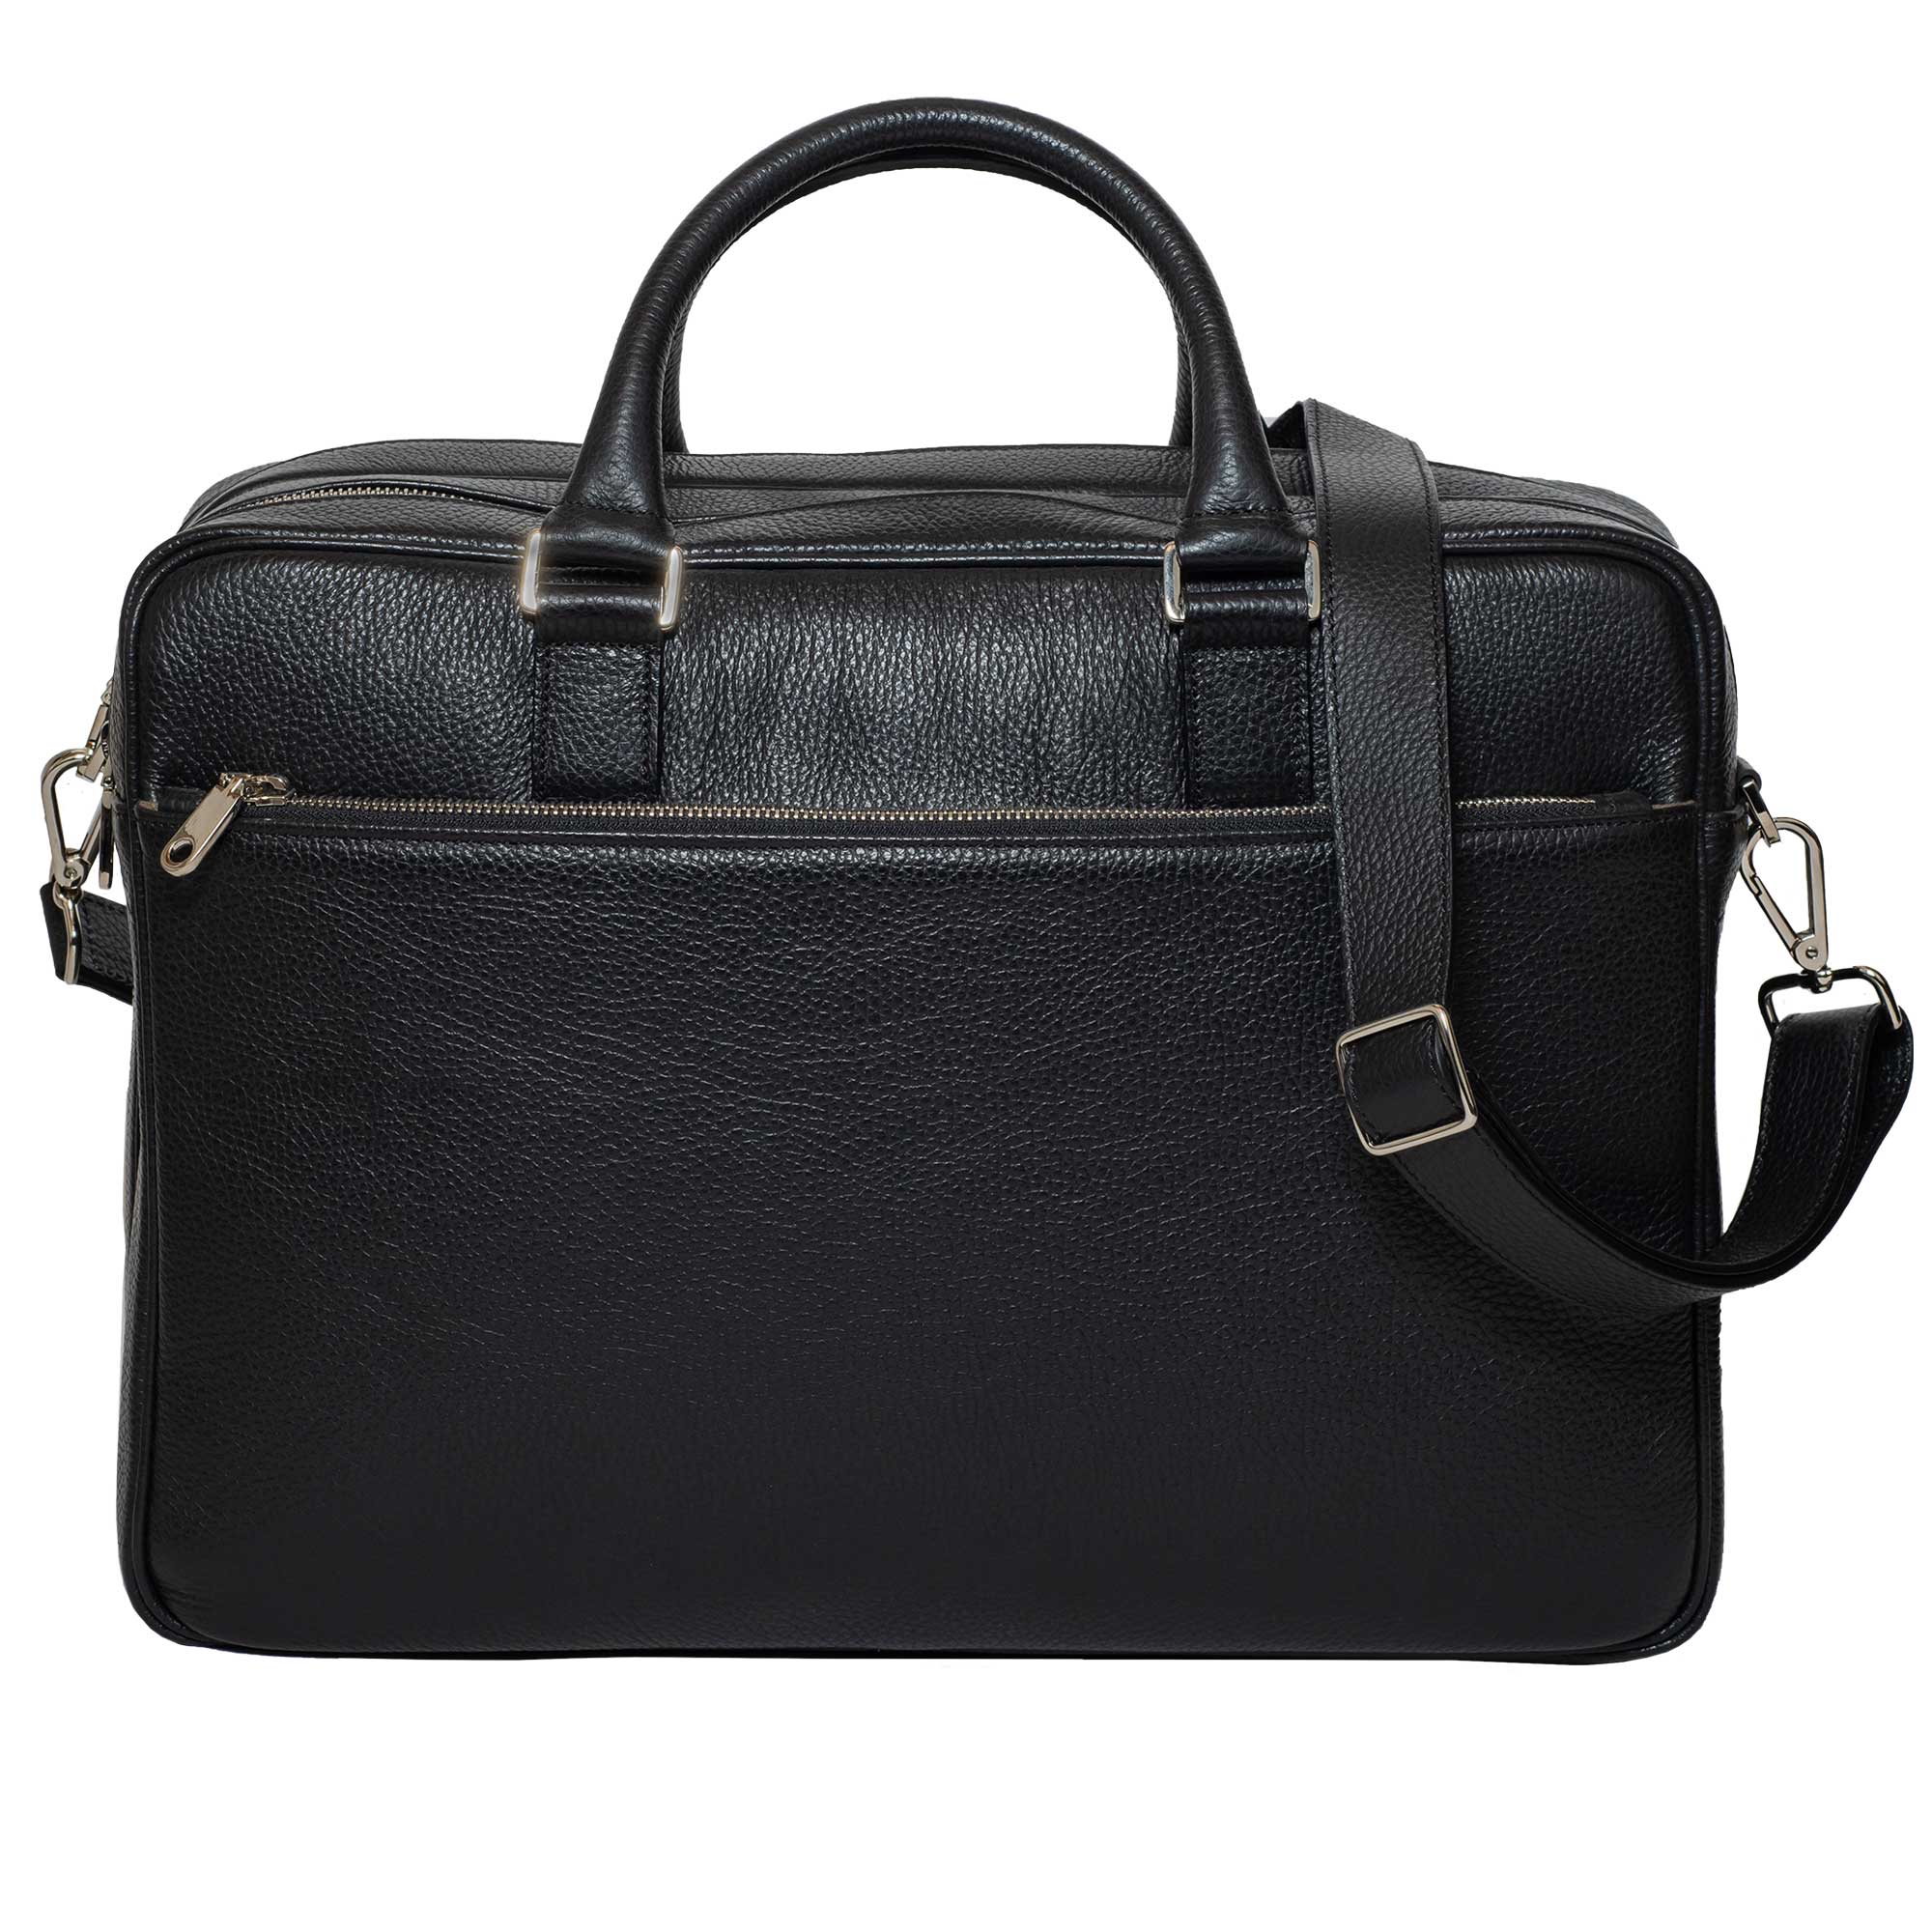 DiLoro Italian Leather Briefcases for Men | Made in Italy - Front View with Strap